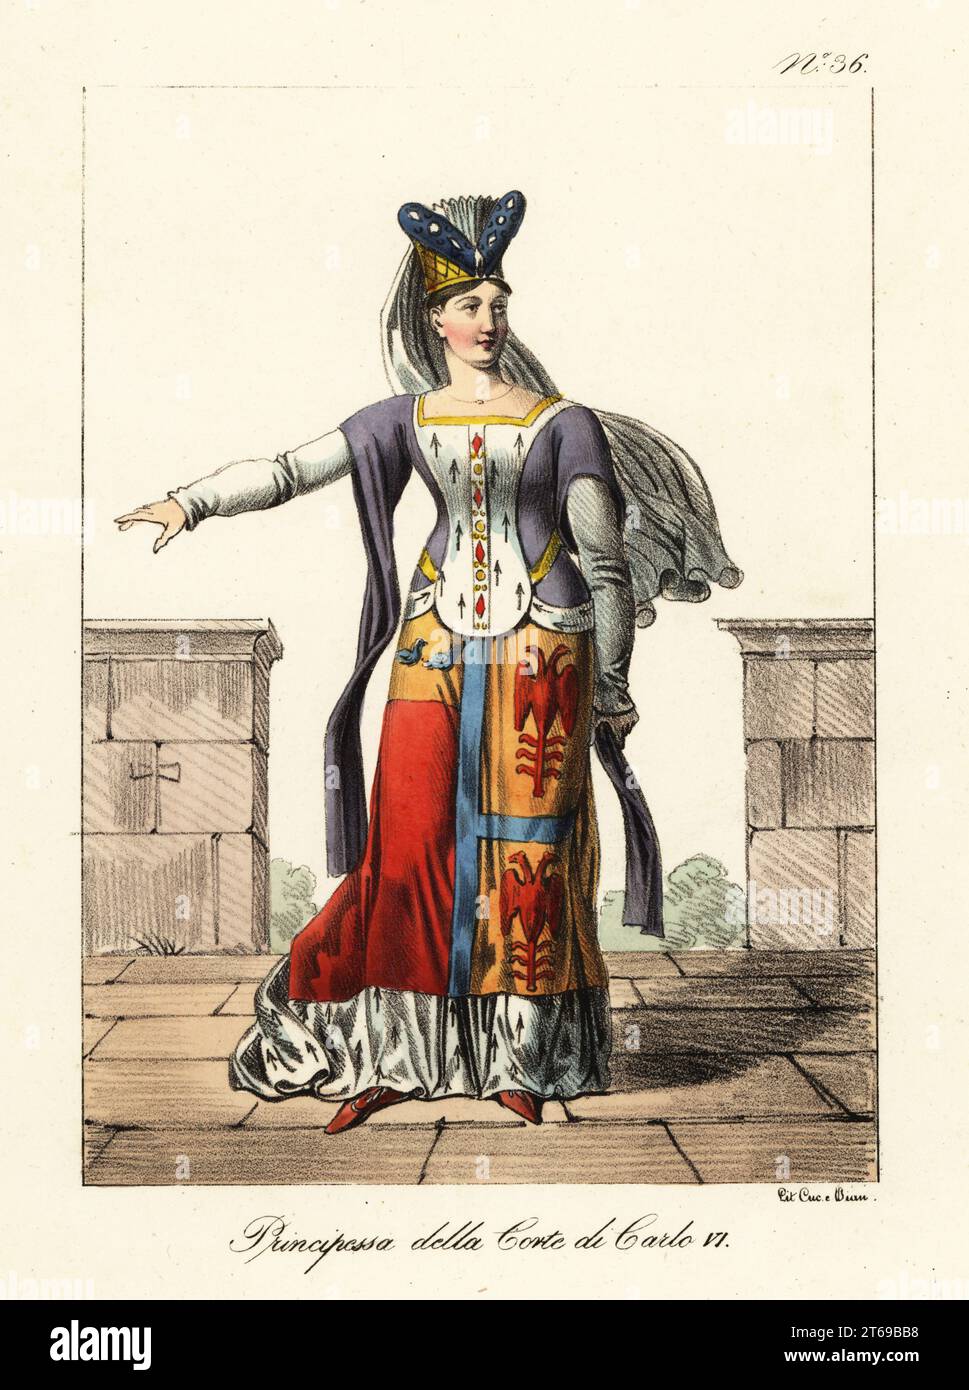 Costume of a French princess at the court of King Charles VI, late 14th century. In tall horned headdress with long veil, long-sleeved gown, bejeweled ermine front, armorial skirt with ermine hem. Charles the Mad's daughters included Isabella, Joan, Marie, Michellle, Catherine. Princesse de la cour de Charles VI. Stock Photo